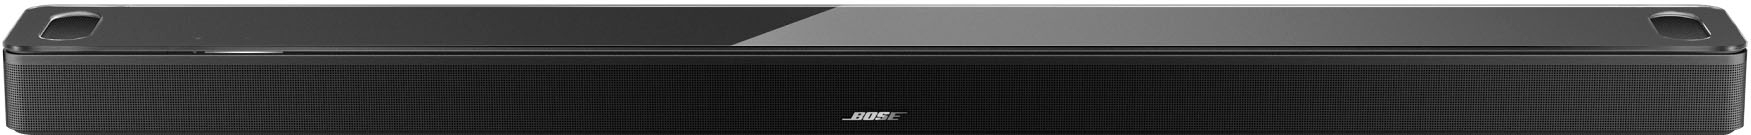 Bose Smart Ultra Soundbar - Voice Black with Buy Best Dolby Atmos Assistant 882963-1100 and